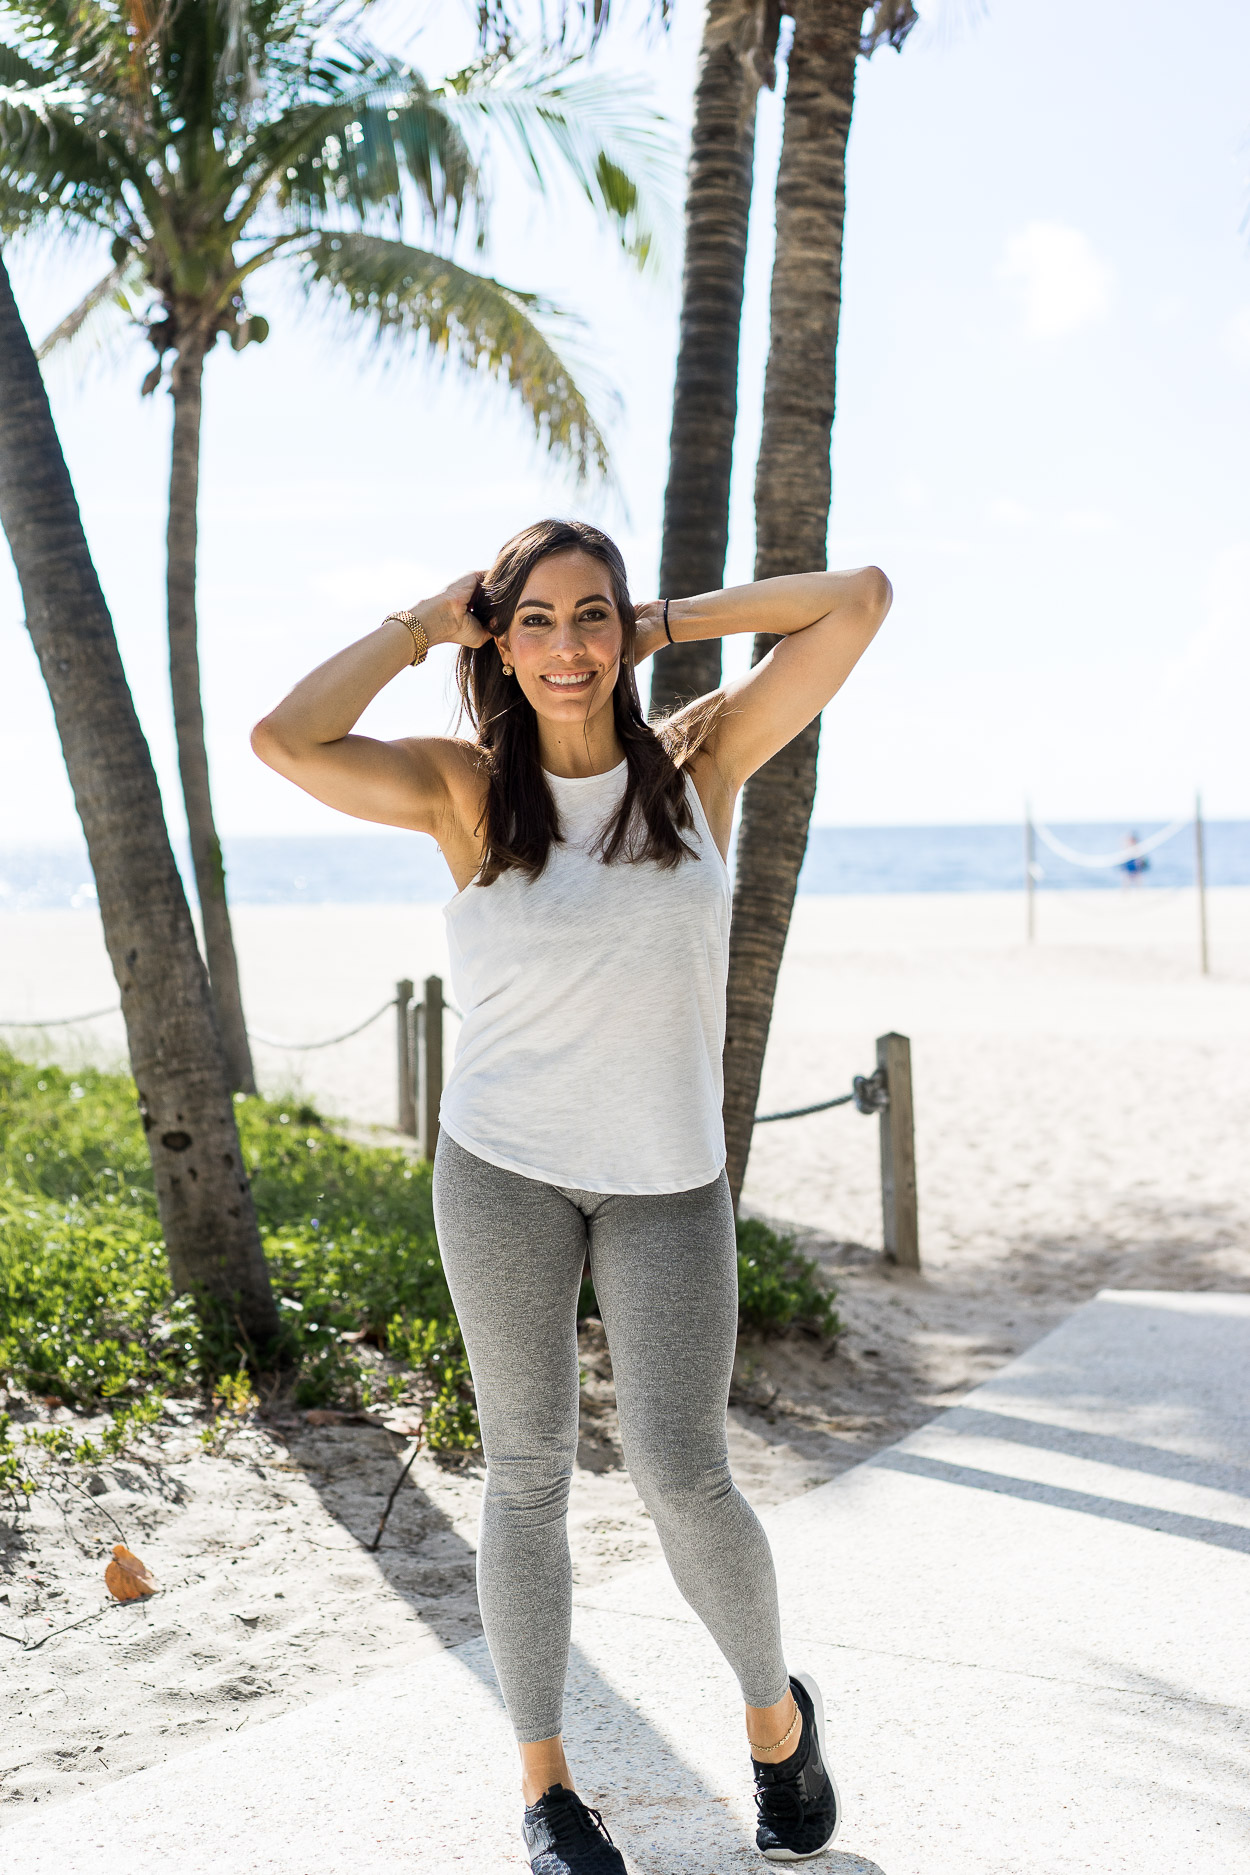 Amanda of A Glam Lifestyle blog wears Old Navy activewear for beach workout